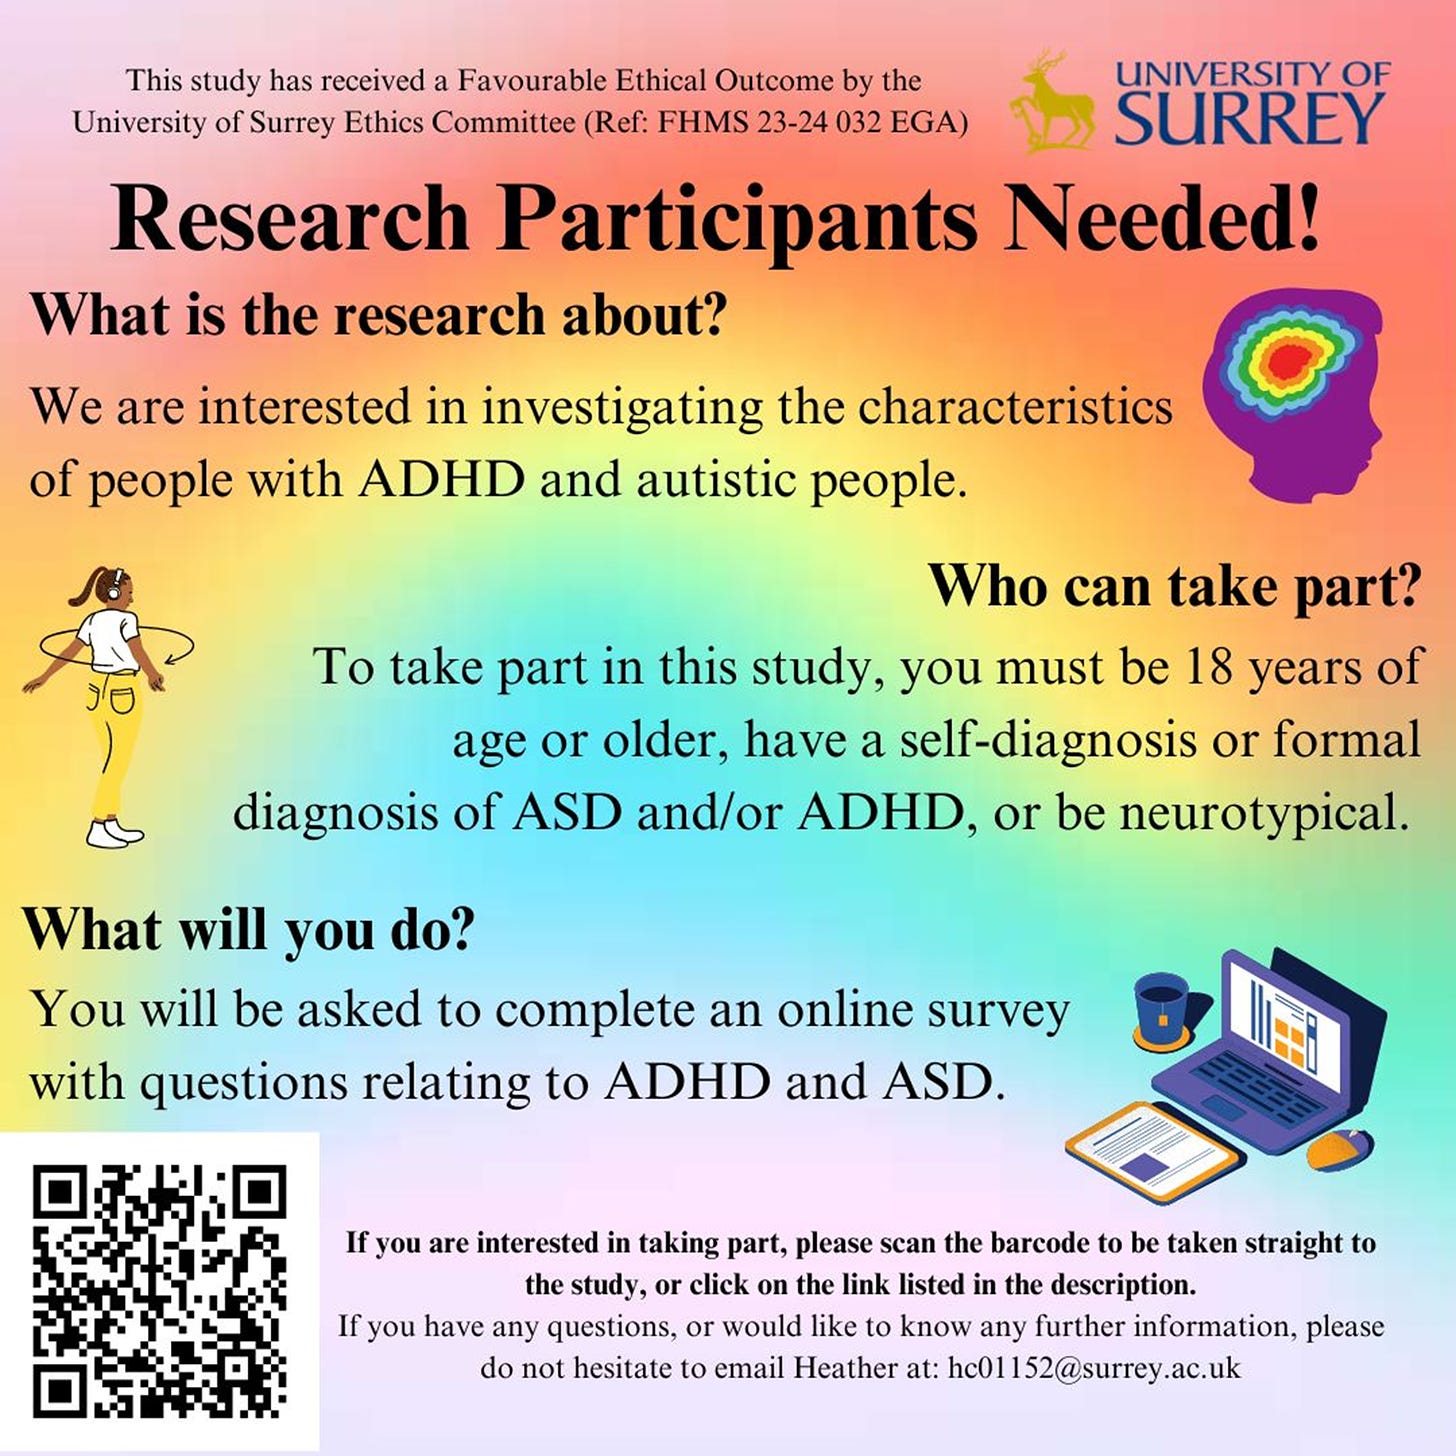  A flyer from the University of Surrey that reads: Research participants needed! What is the research about? We are interested in investigating the characteristics of people with ADHD and autistic people. Who can take part? You must be 18 years of age or older, have a self-diagnosis or formal diagnosis of ASD and/or ADHD, or be neurotypical. What will you do? You will be asked to complete an online survey with questions relating to ADHD and ASD. If you are interested in taking part, please scan the barcode to be taken straight to the study, or click on the link listed in the description. If you have any questions, or would like to know any further information, please do not hesitate to email Heather at: hc01152@surrey.ac.uk